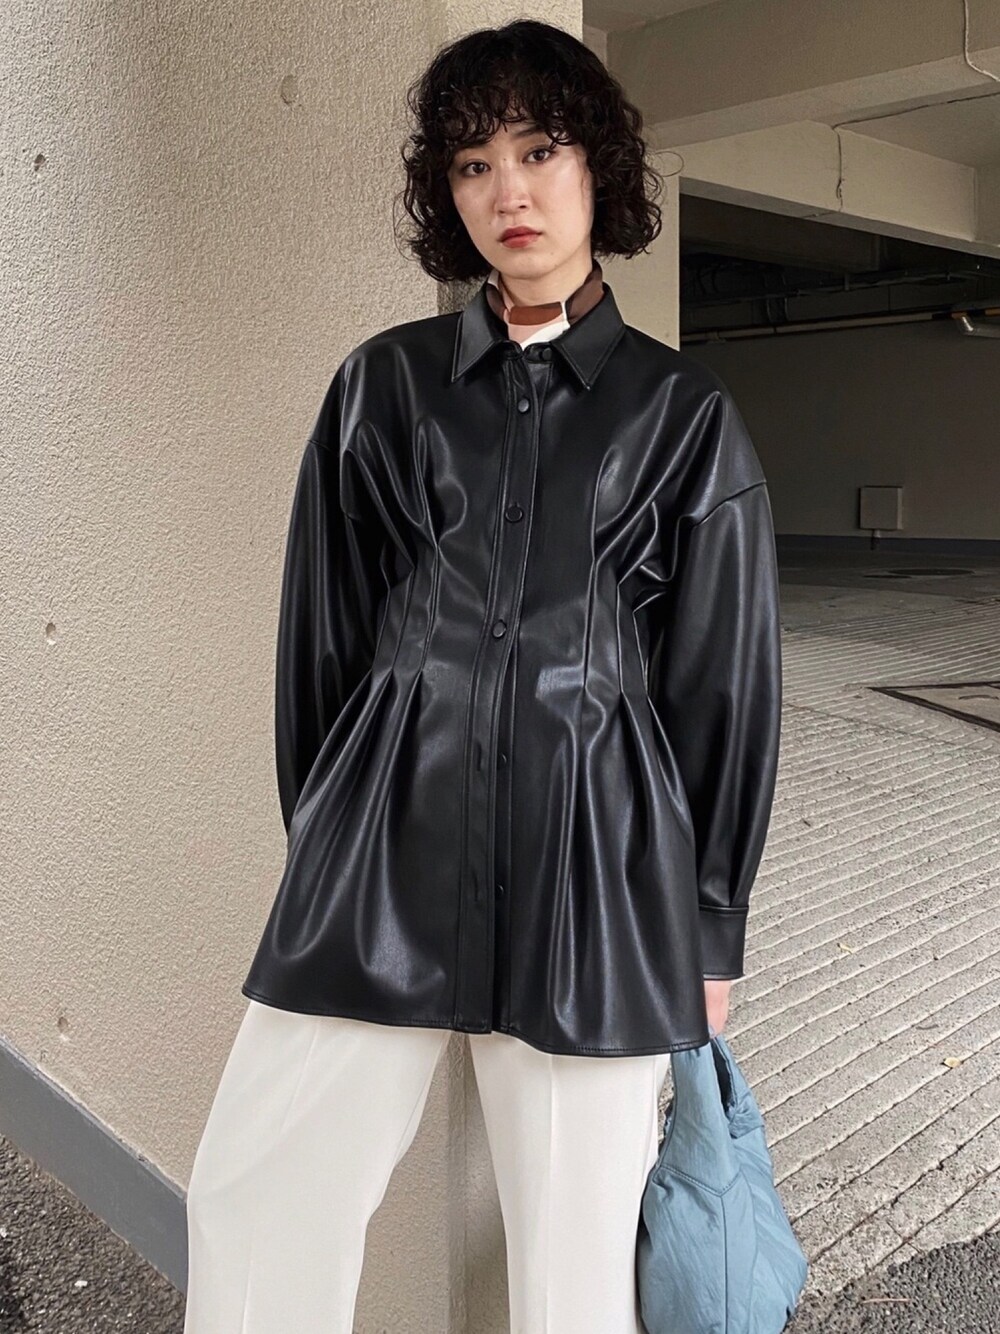 MOUSSY OFFICIALさんの「F／LEATHER TUCKED シャツ（MOUSSY）」を使ったコーディネート